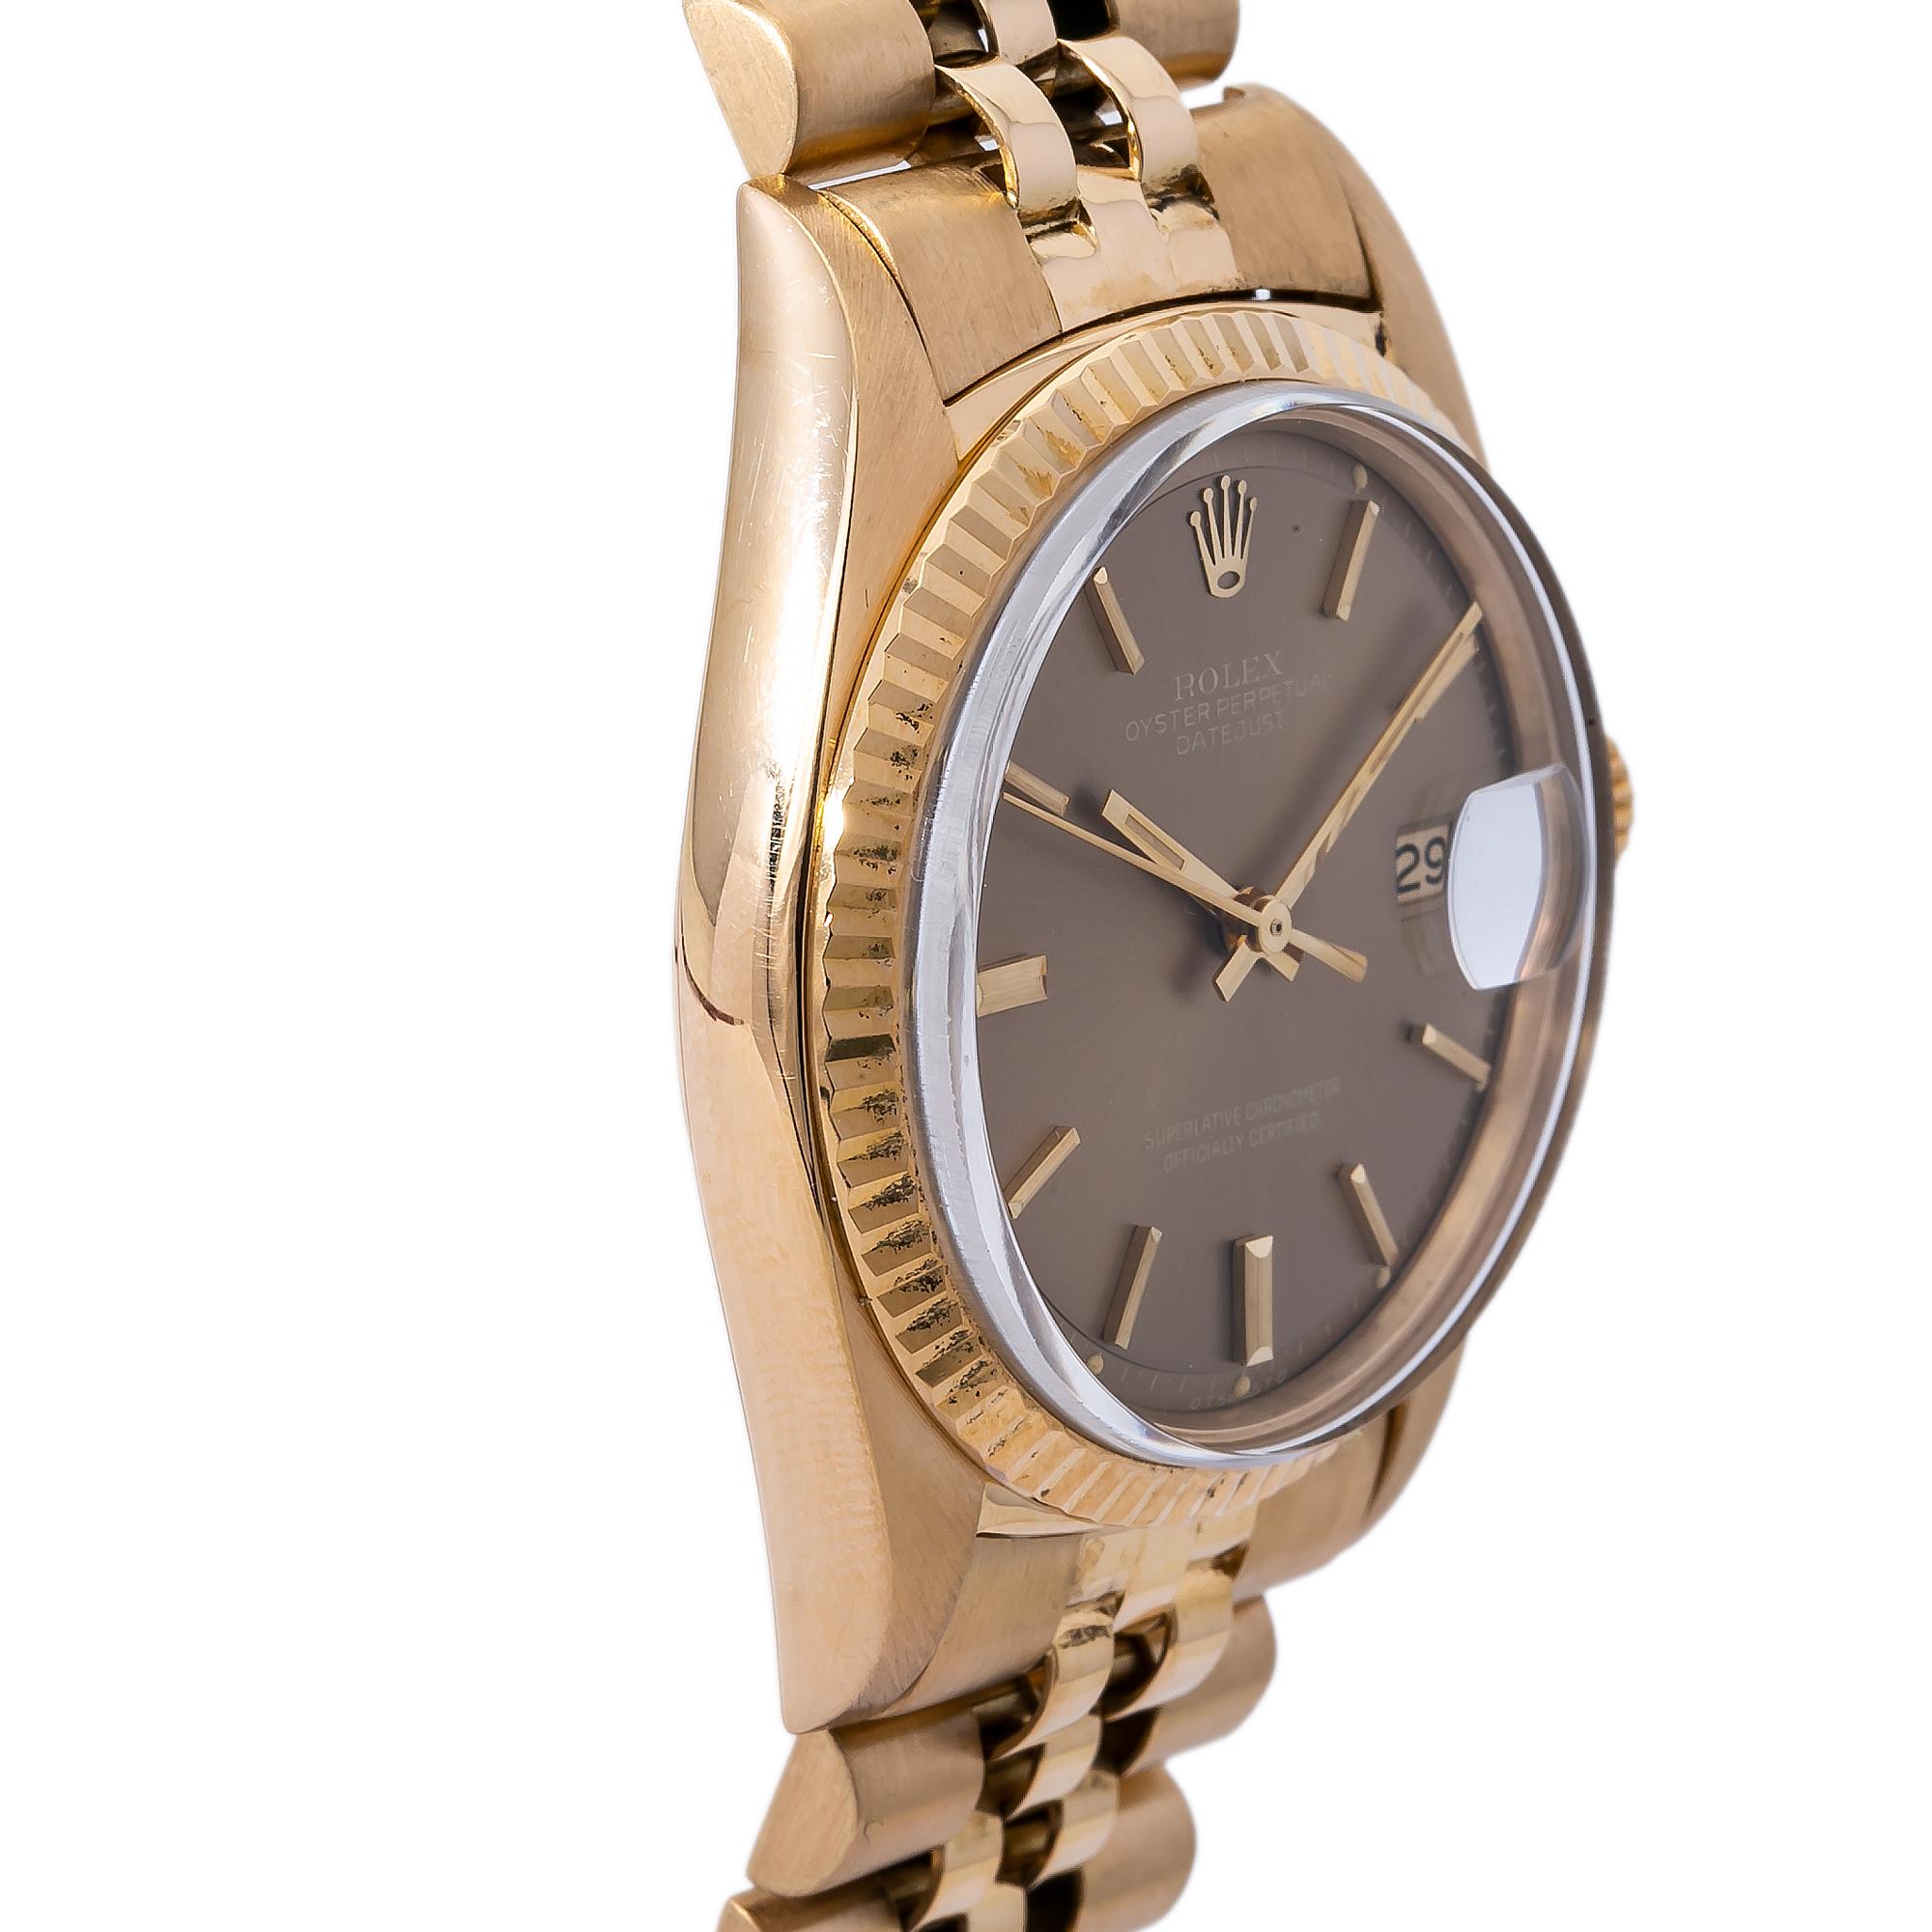 Contemporary Rolex Datejust Jubiless 1601 Vintage 18k Yellow Gold Champagne Dial Men's For Sale